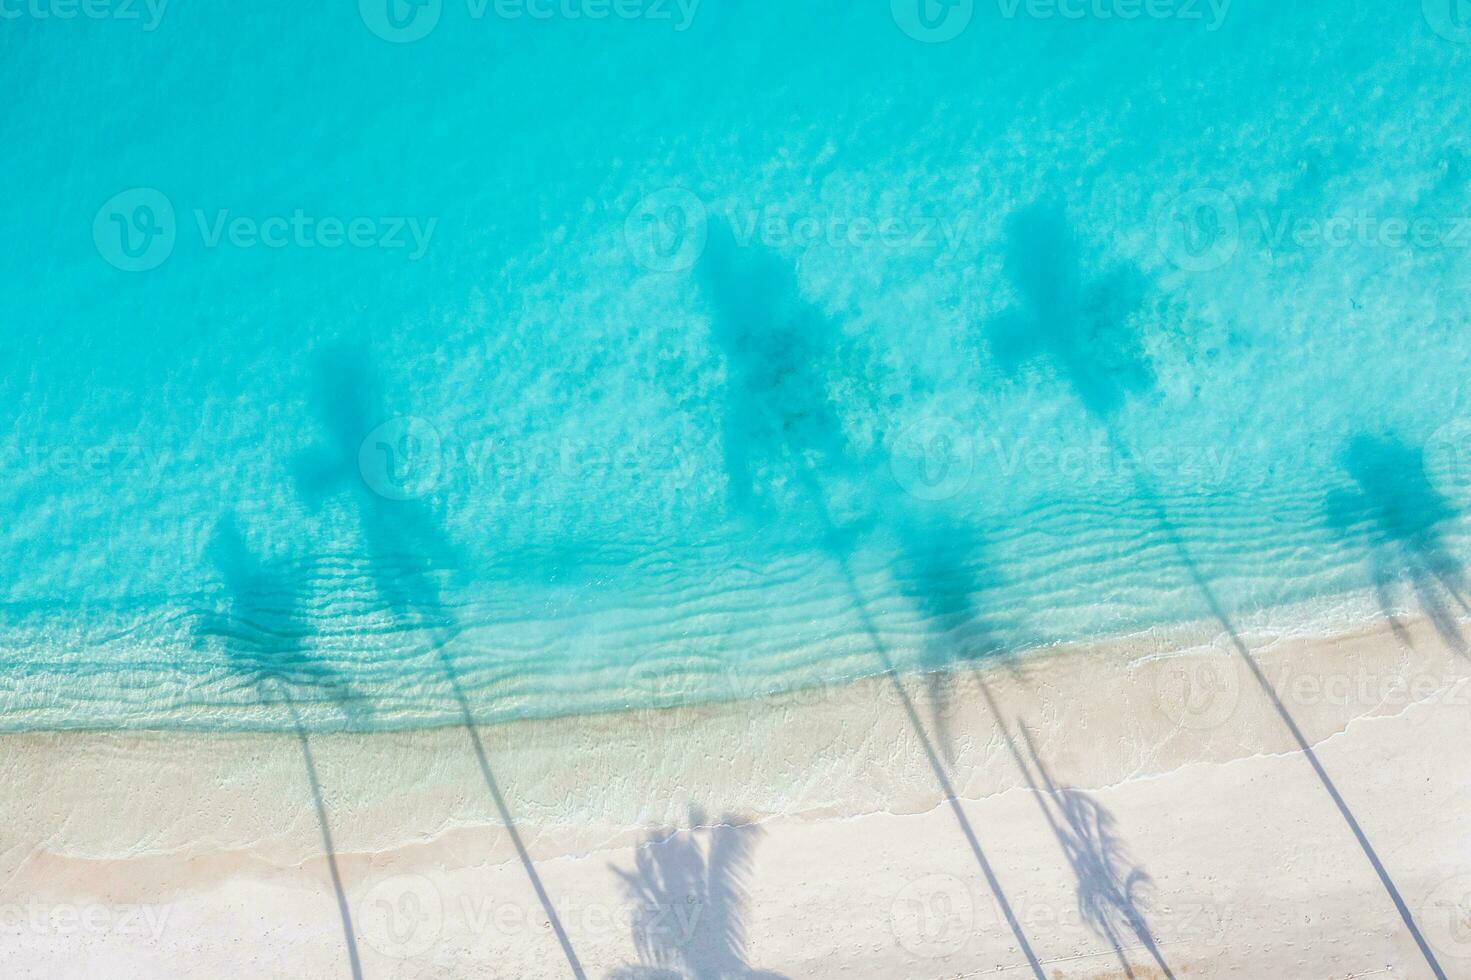 Beautiful palm trees shadow on the sandy beach and turquoise ocean from above. Amazing summer nature landscape. Stunning sunny beach scenery relaxing peaceful and inspirational beach vacation template photo